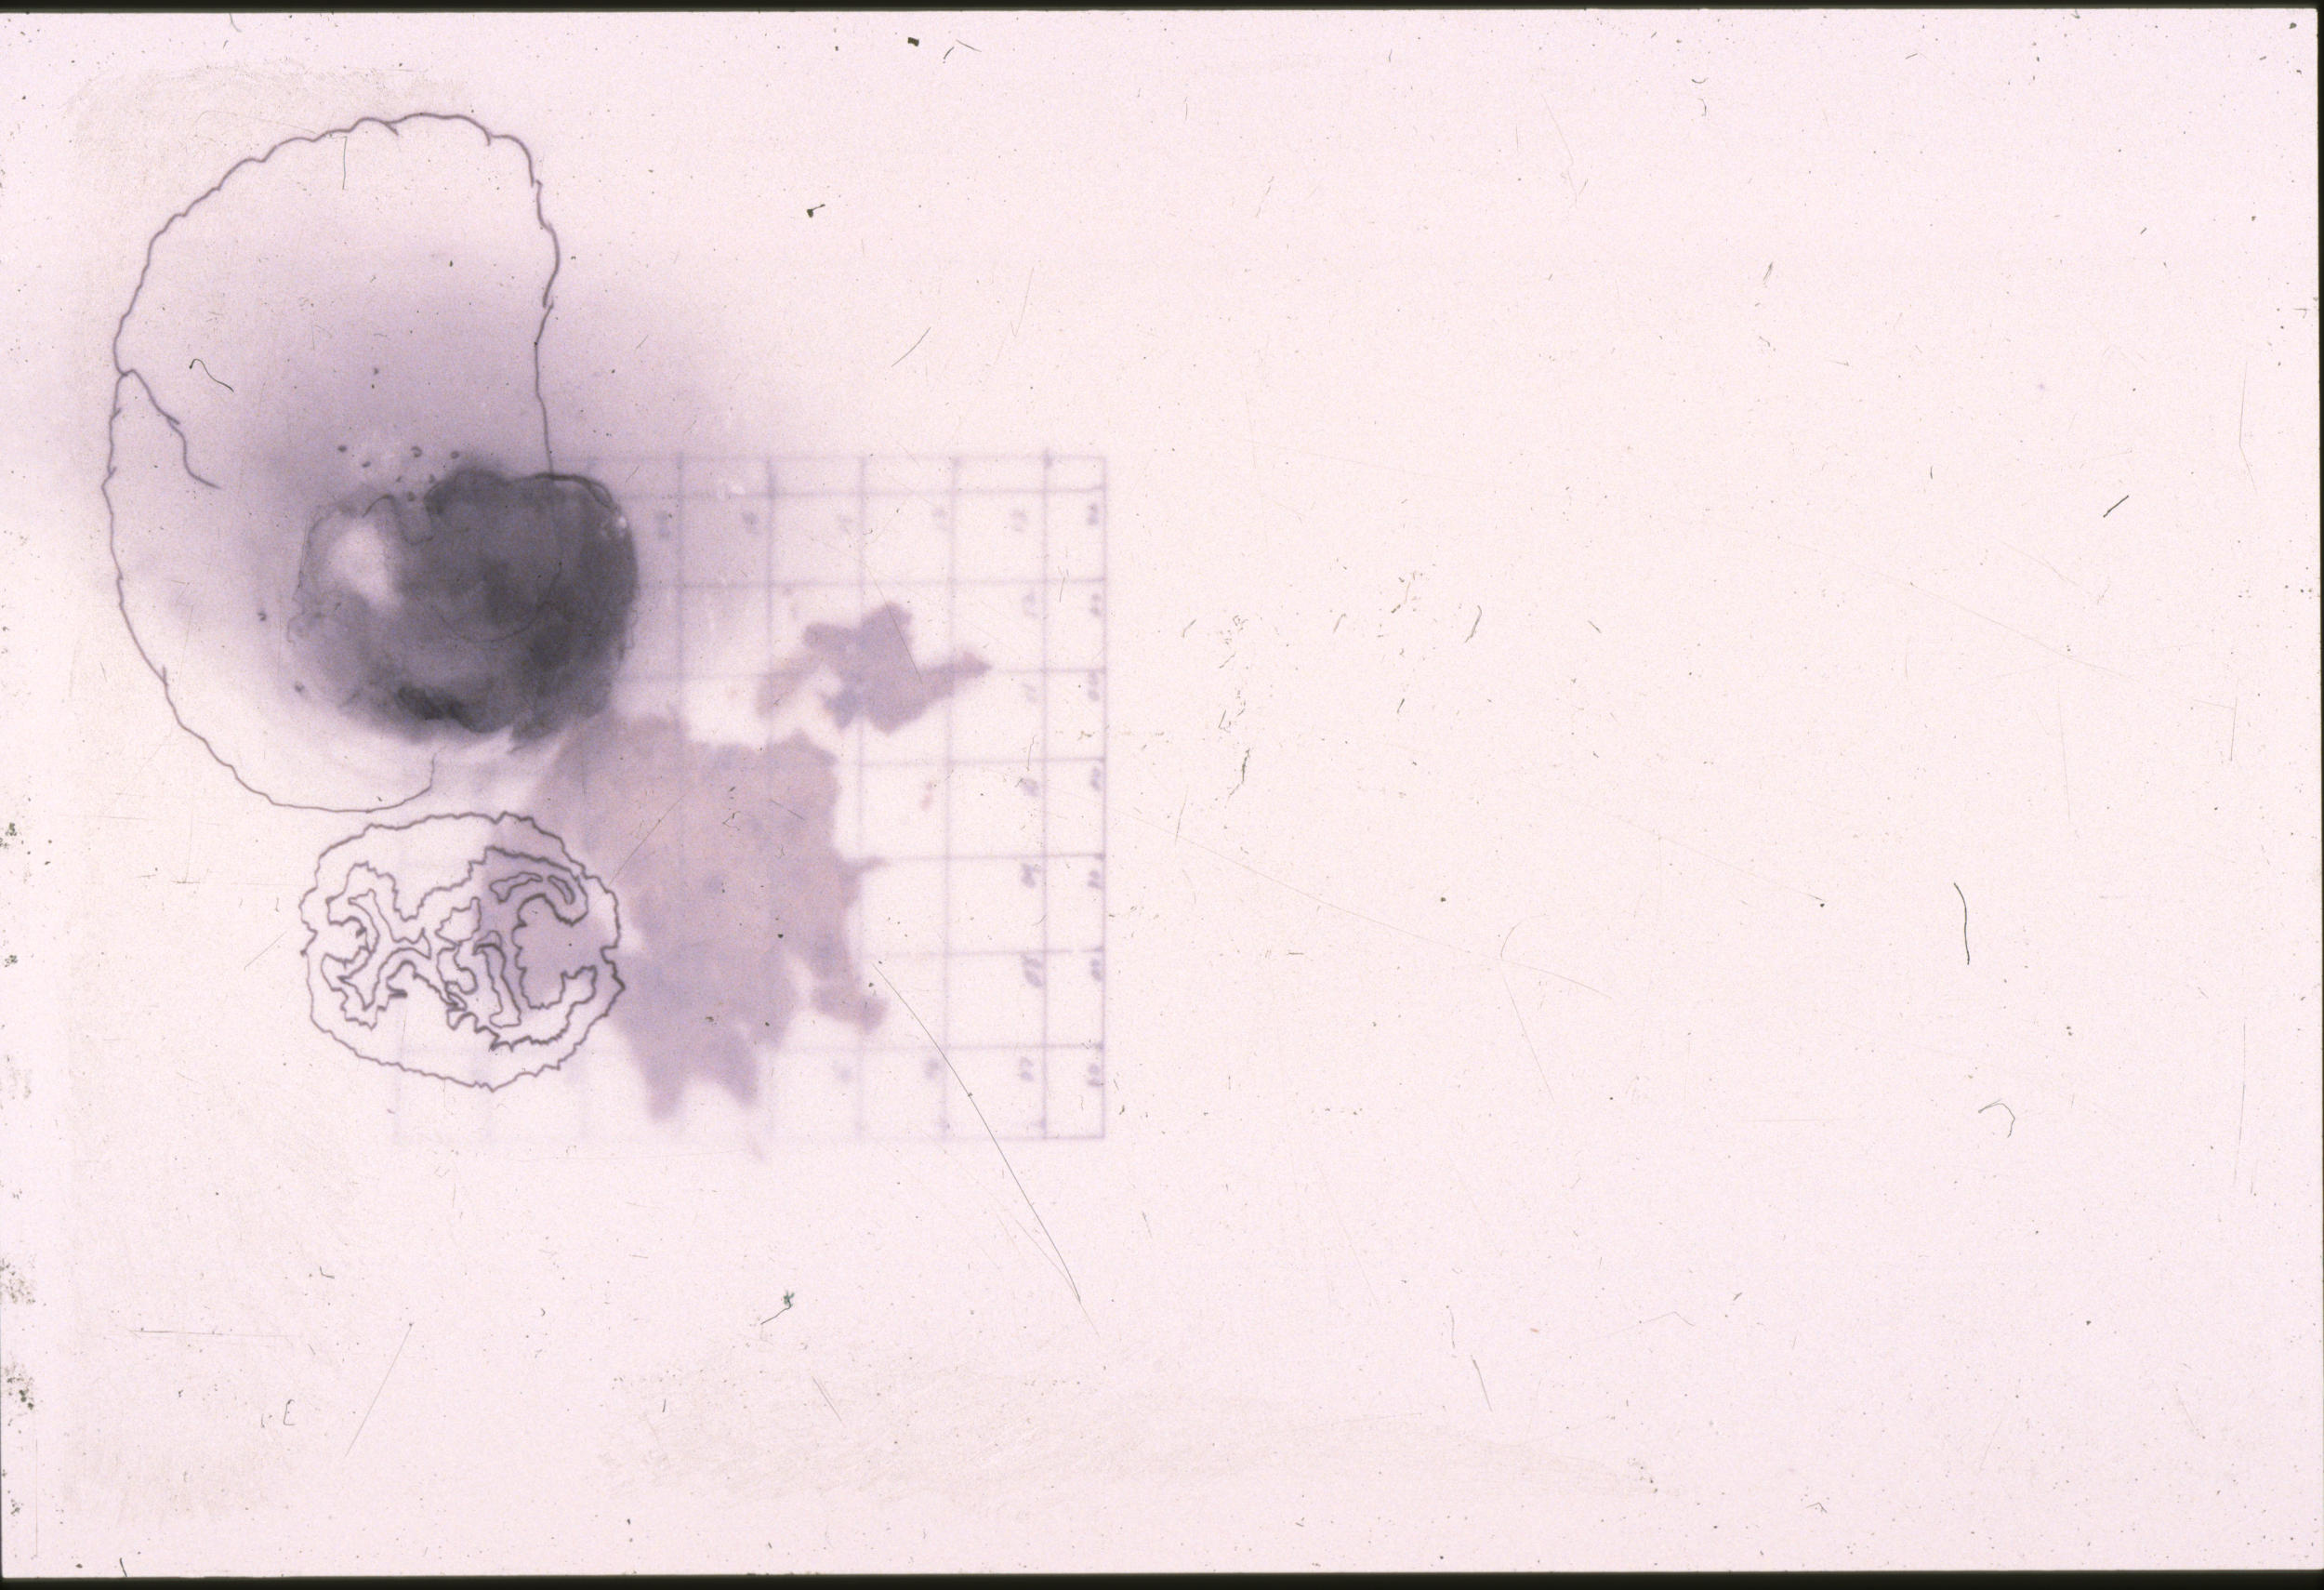 Mapping of Memories Series No. 4, graphite on Mylar, 9 x 12 inches, 2001